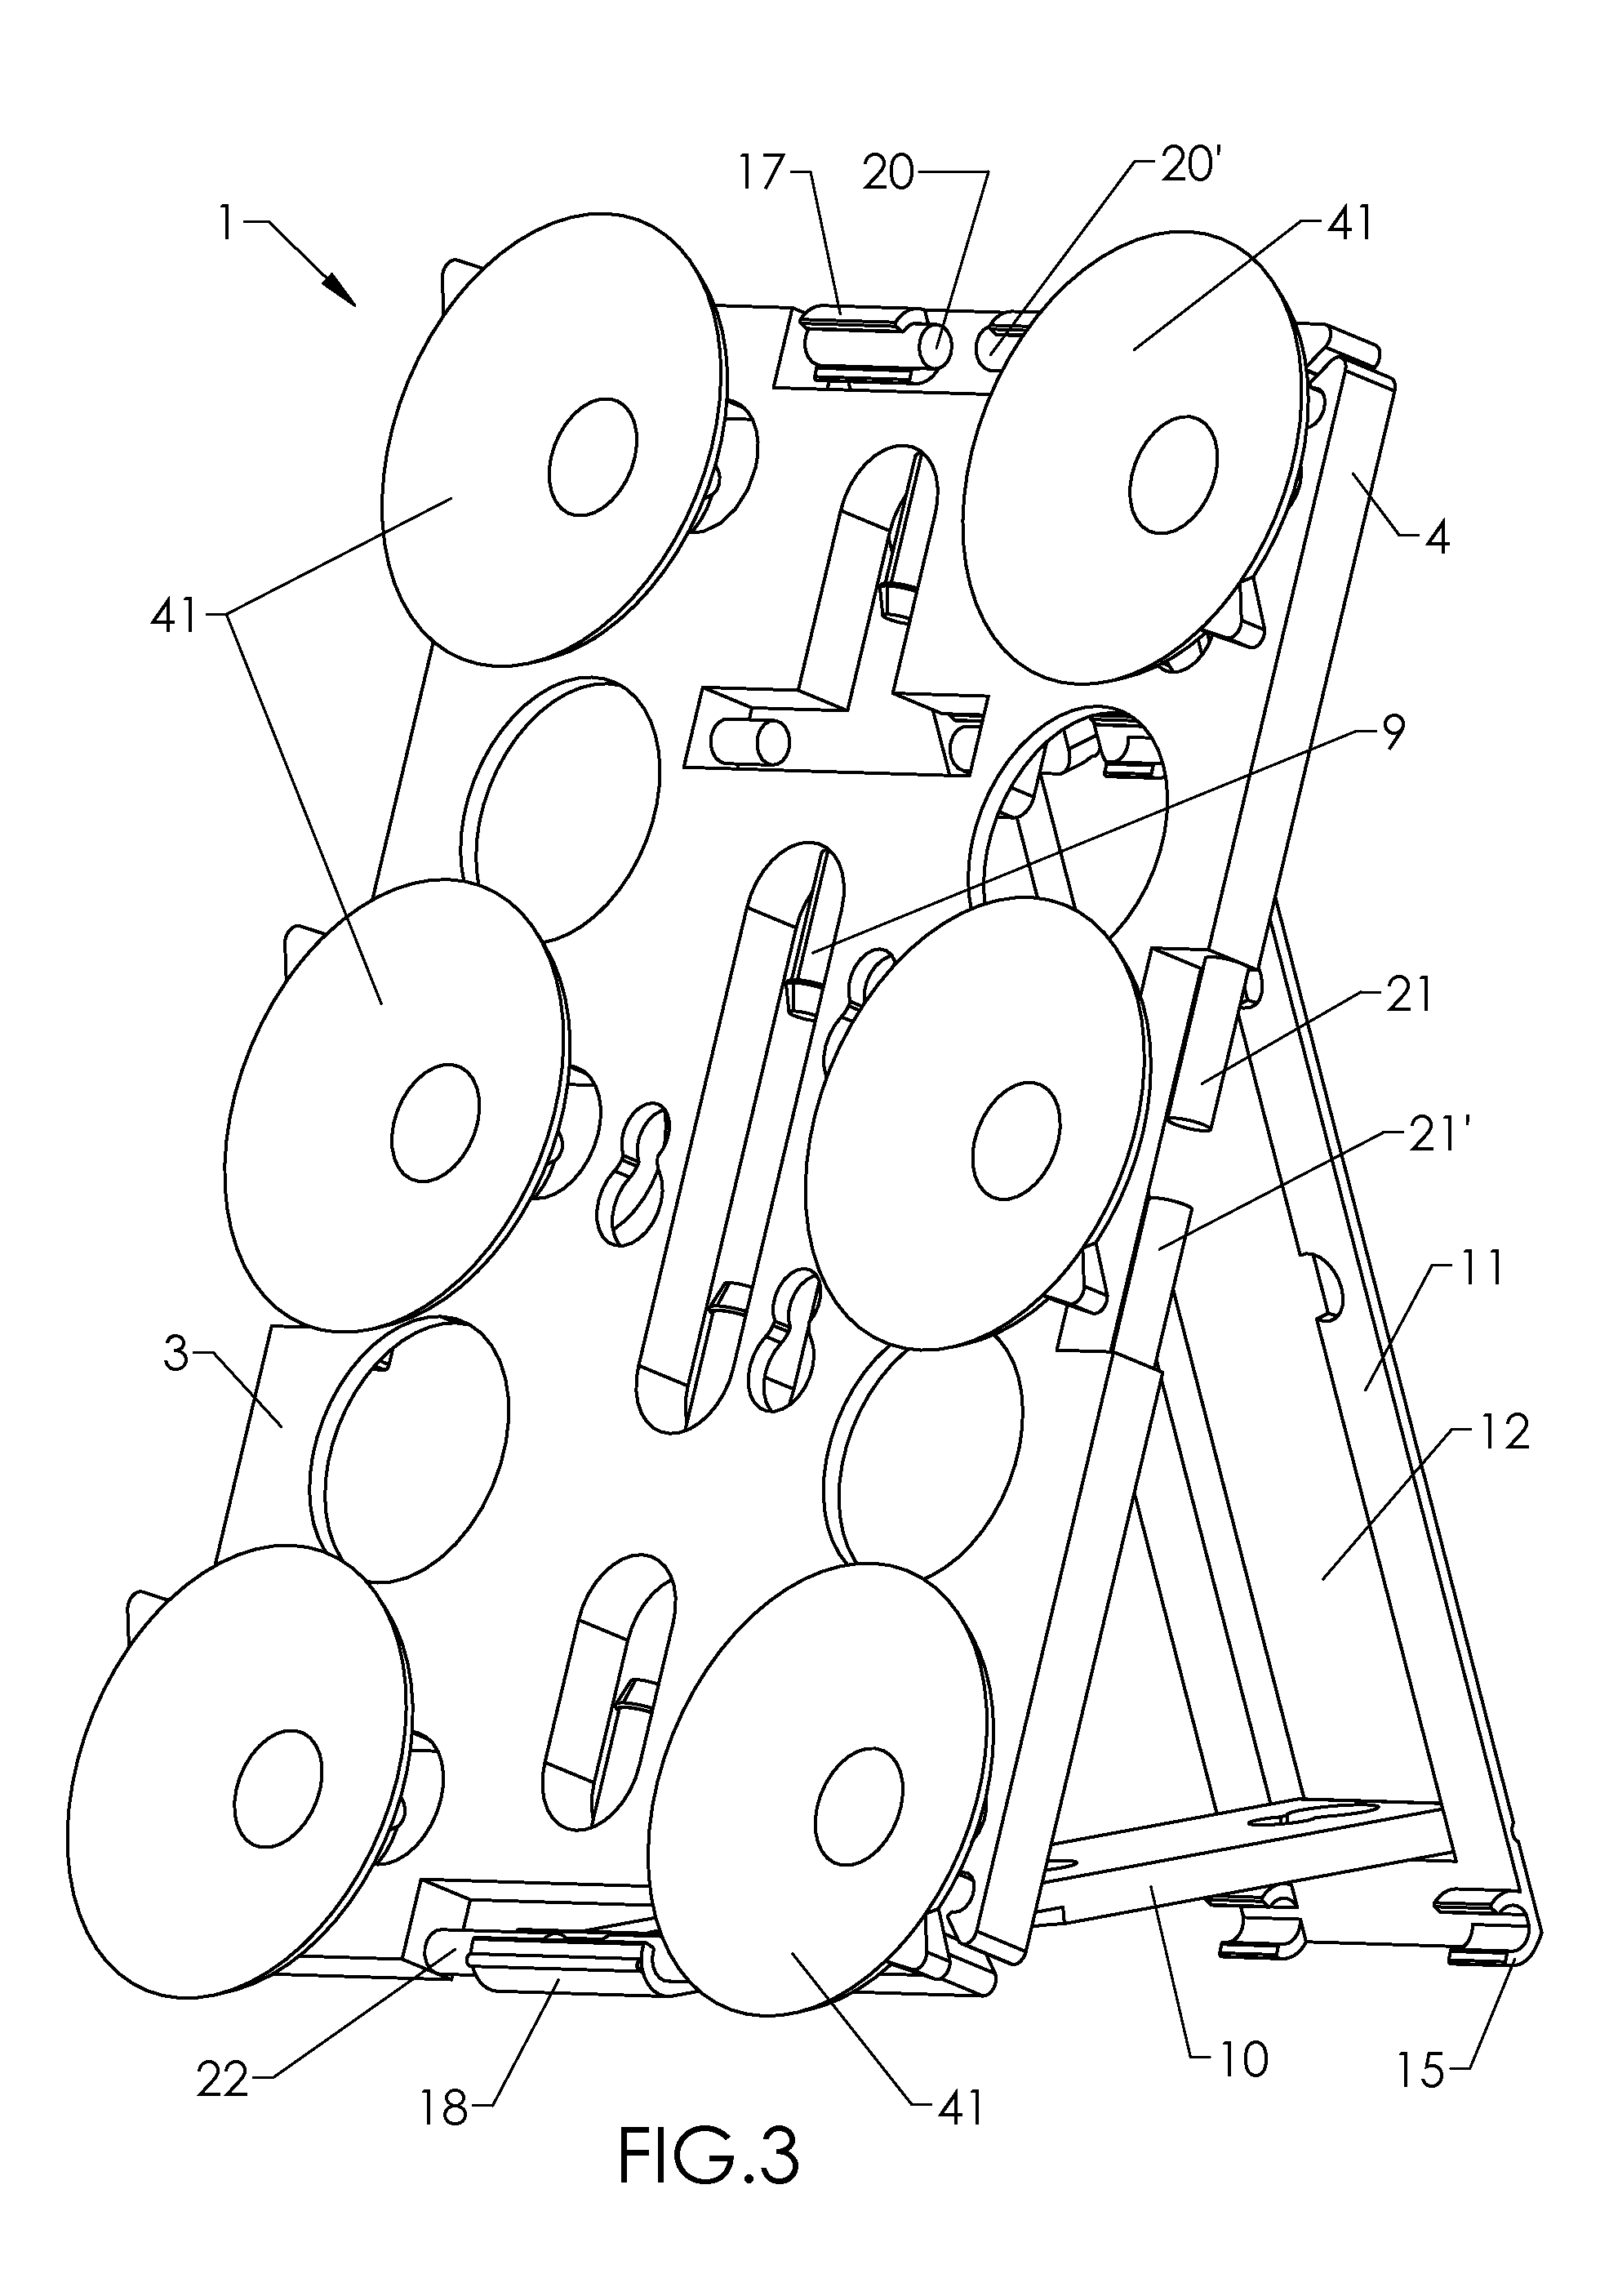 Multiple suction cup attachment platform: securing an electronic device on a vertical surface